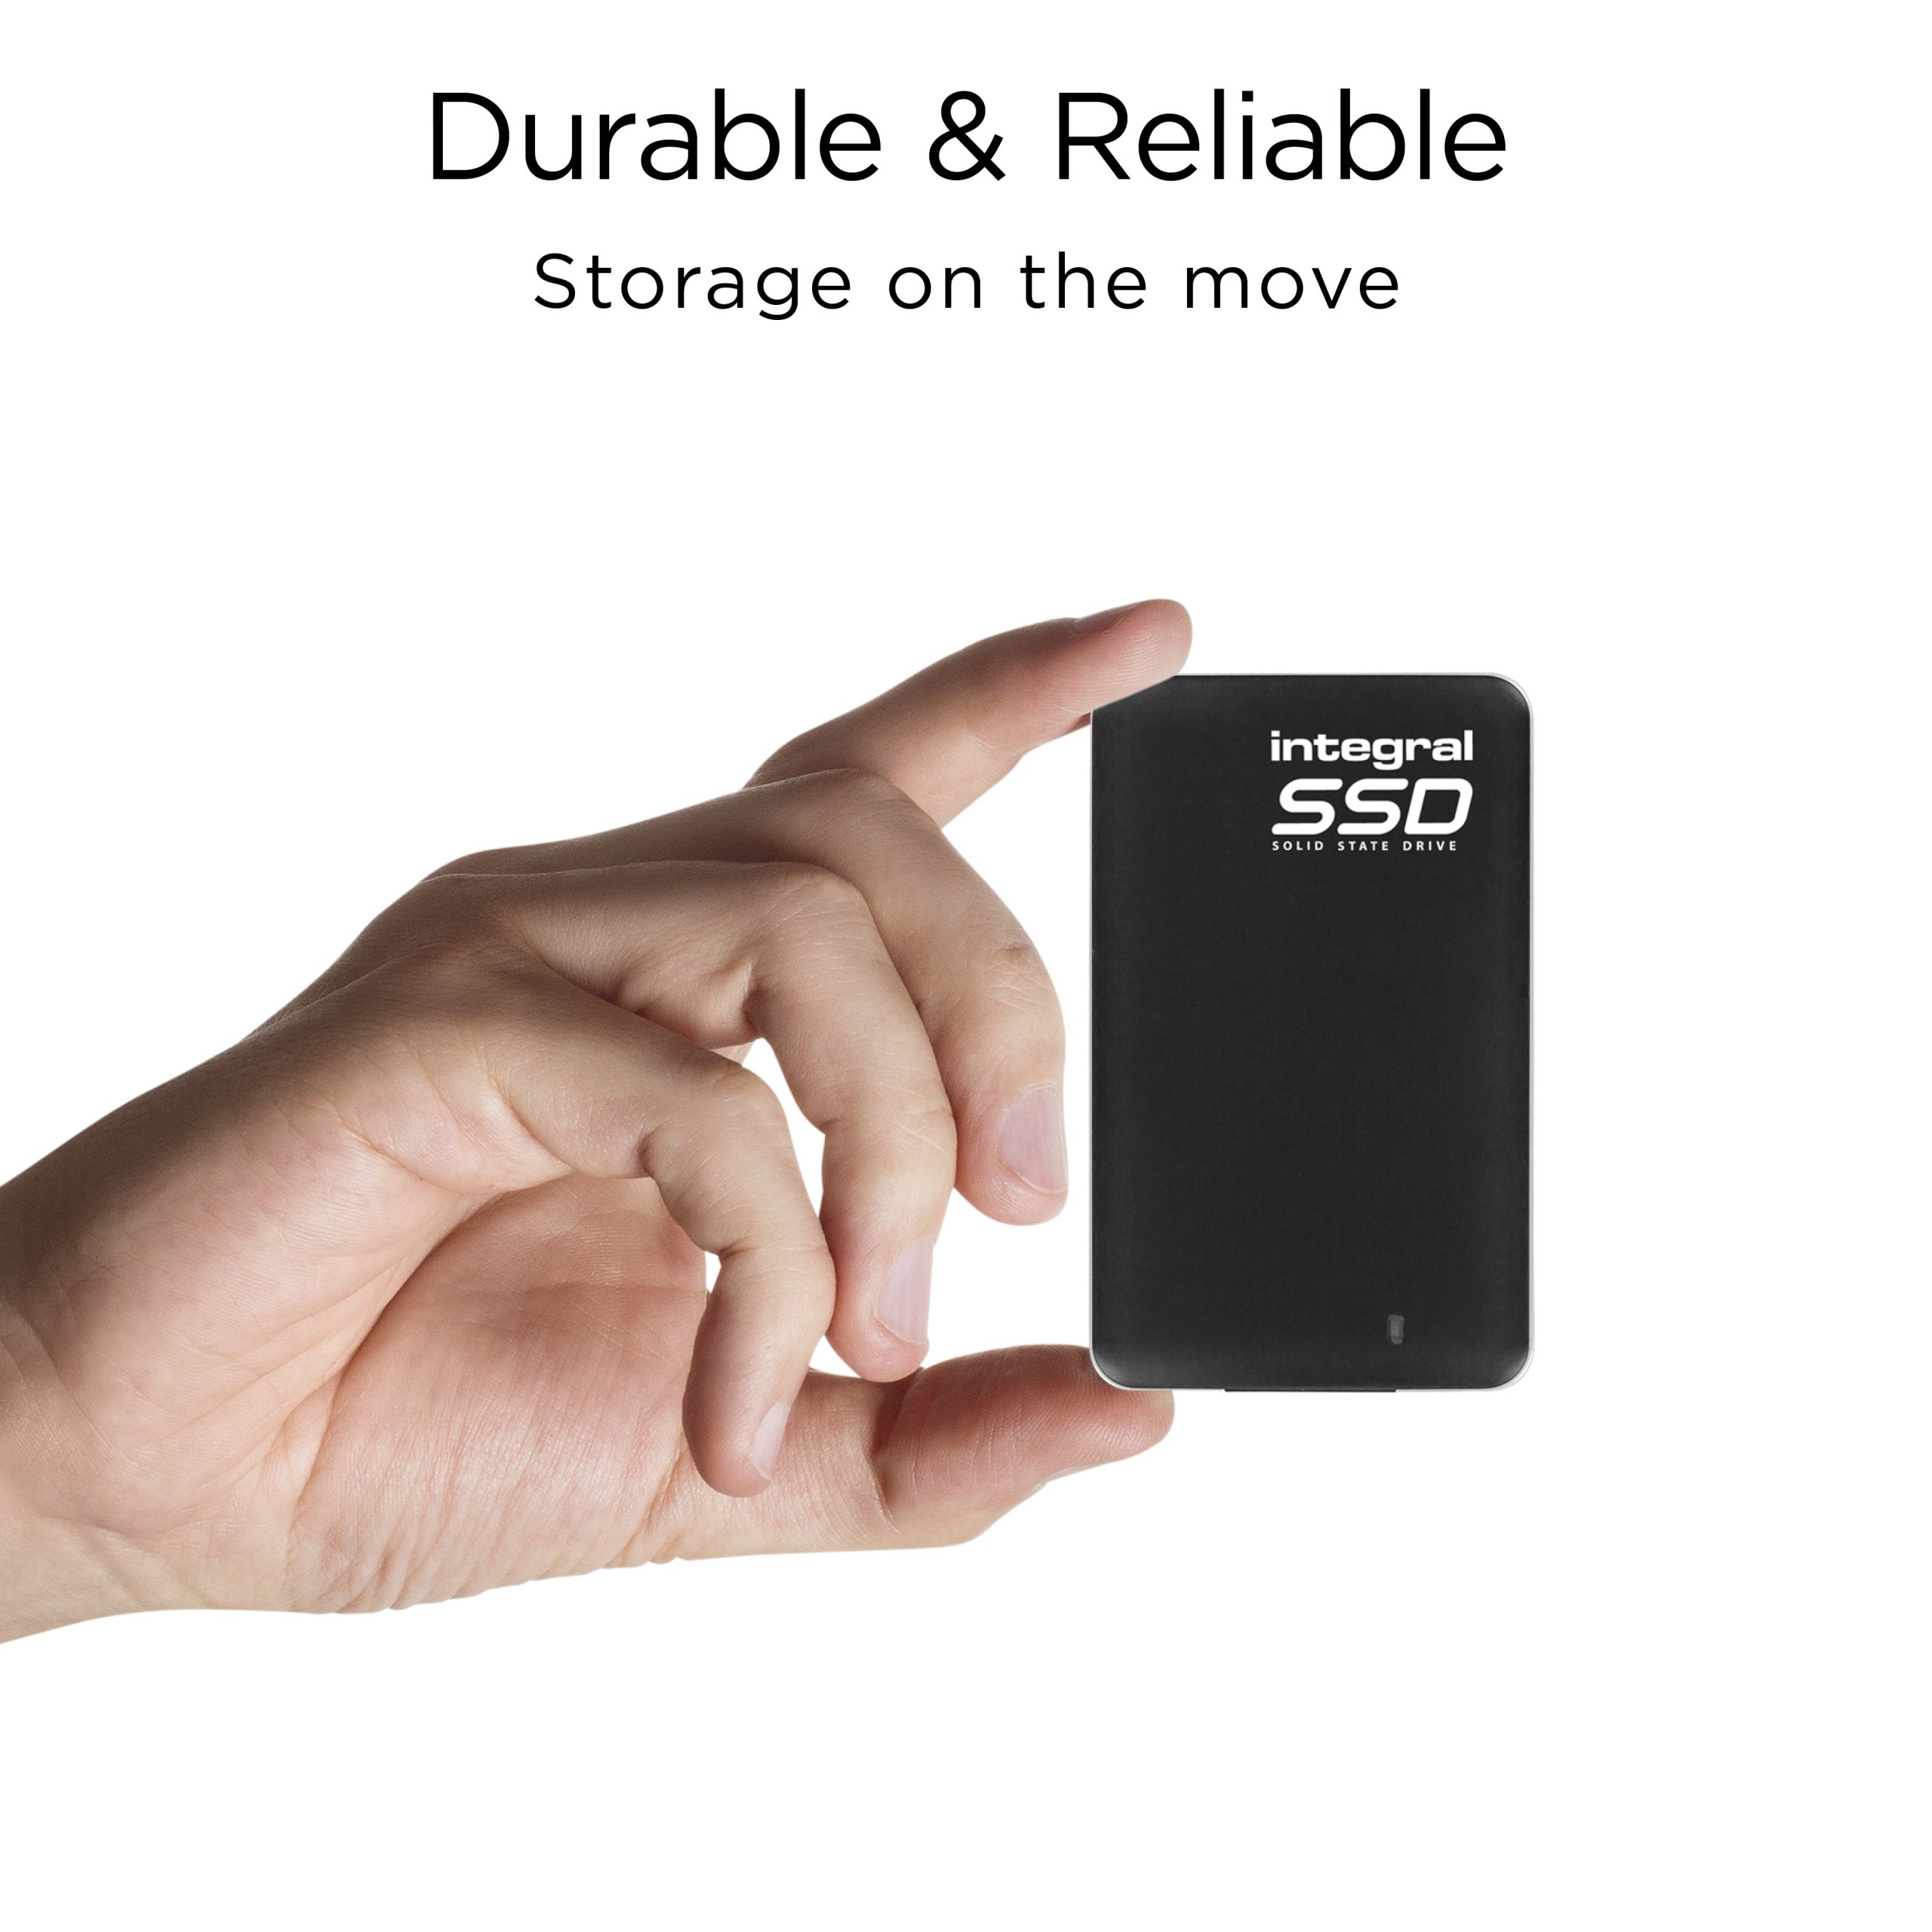 USB 3.0 Portable Solid-State Drive Durable and Reliable